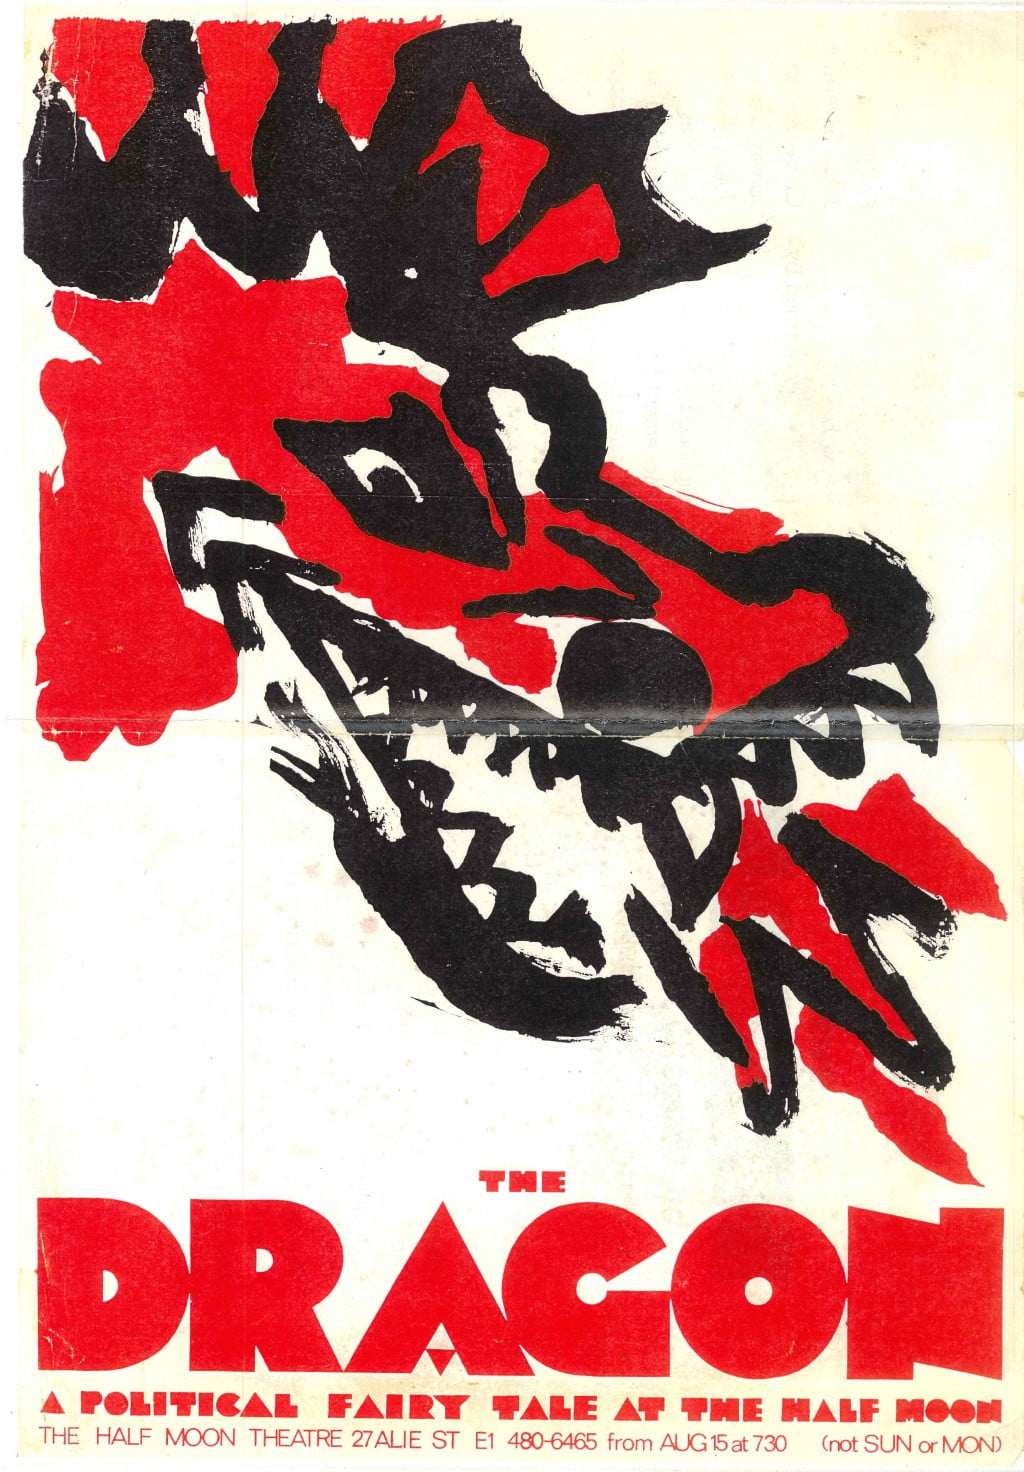 Dragon, The - poster and programme cover